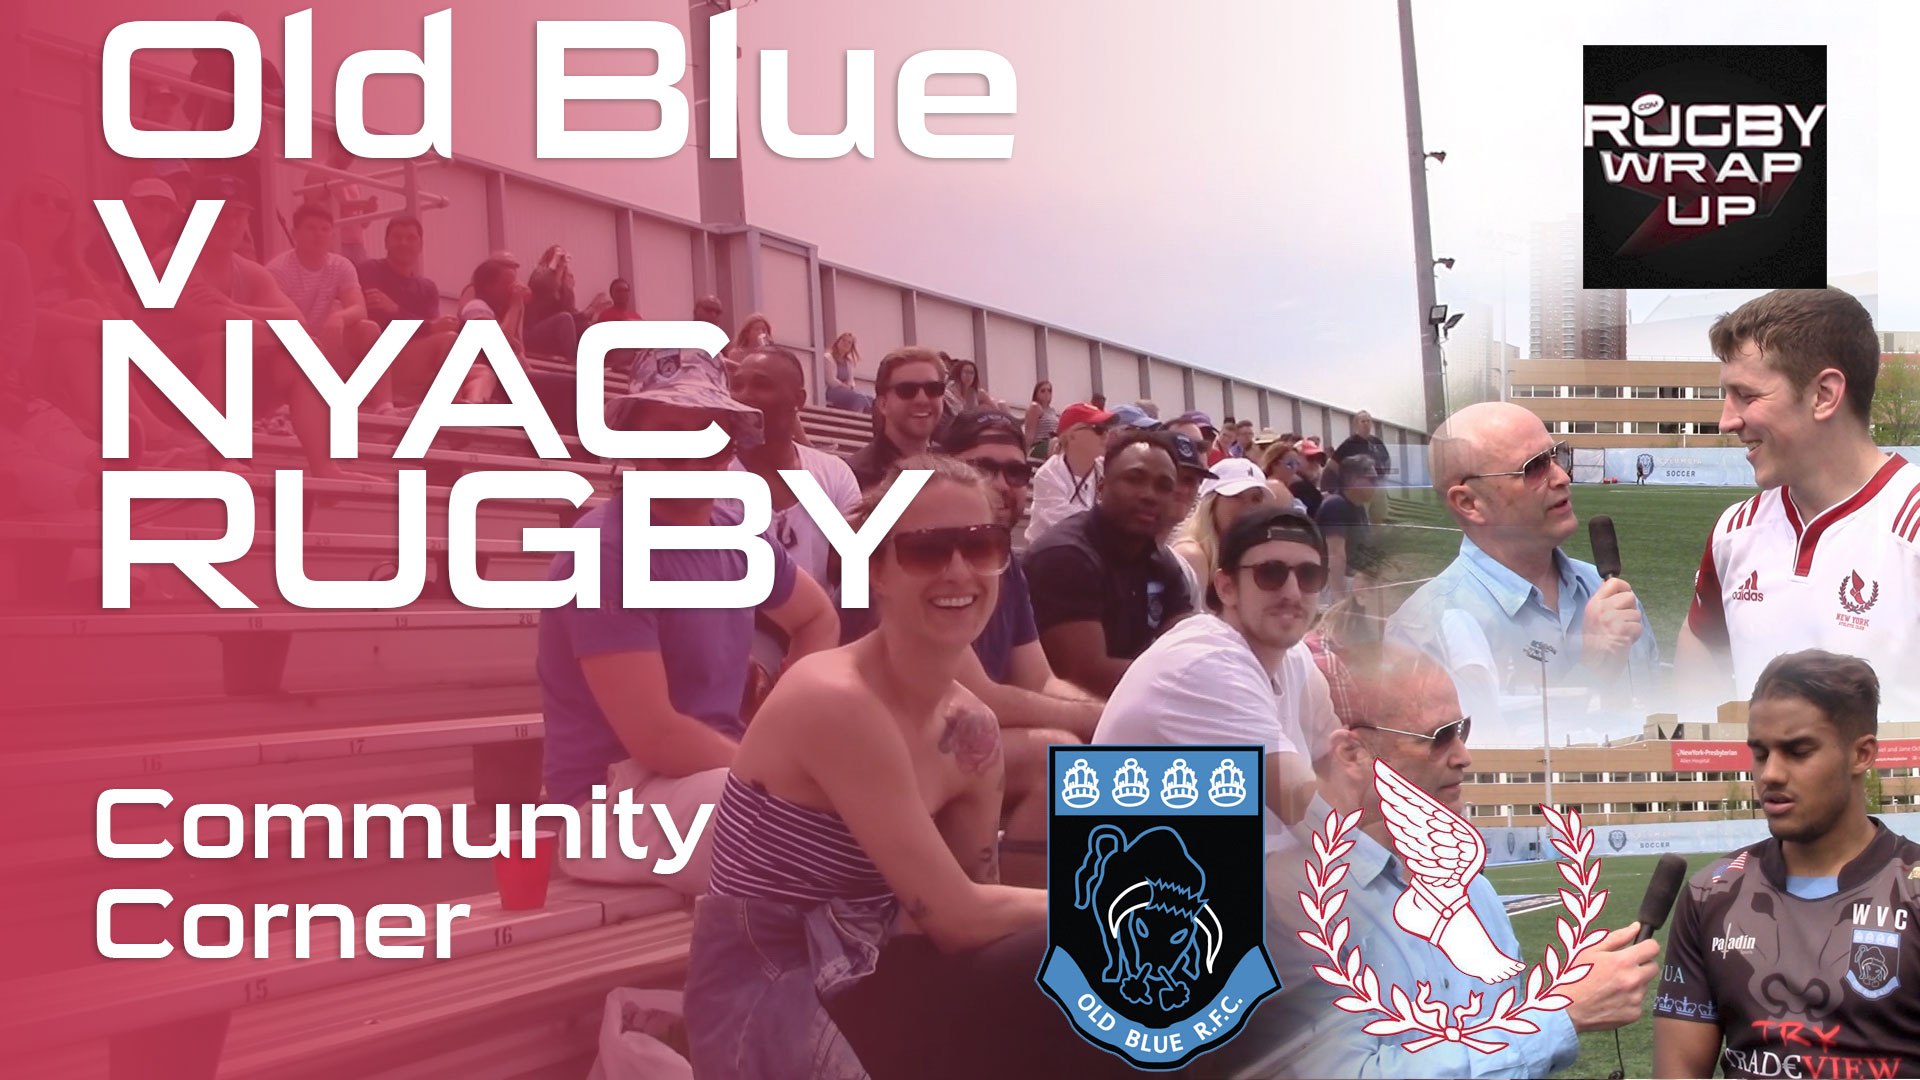 Old Blue's Connor Wallace-Sims, NYAC's Nate Brakely, Chris Edwards & Banter, RUGBY WRAP UP